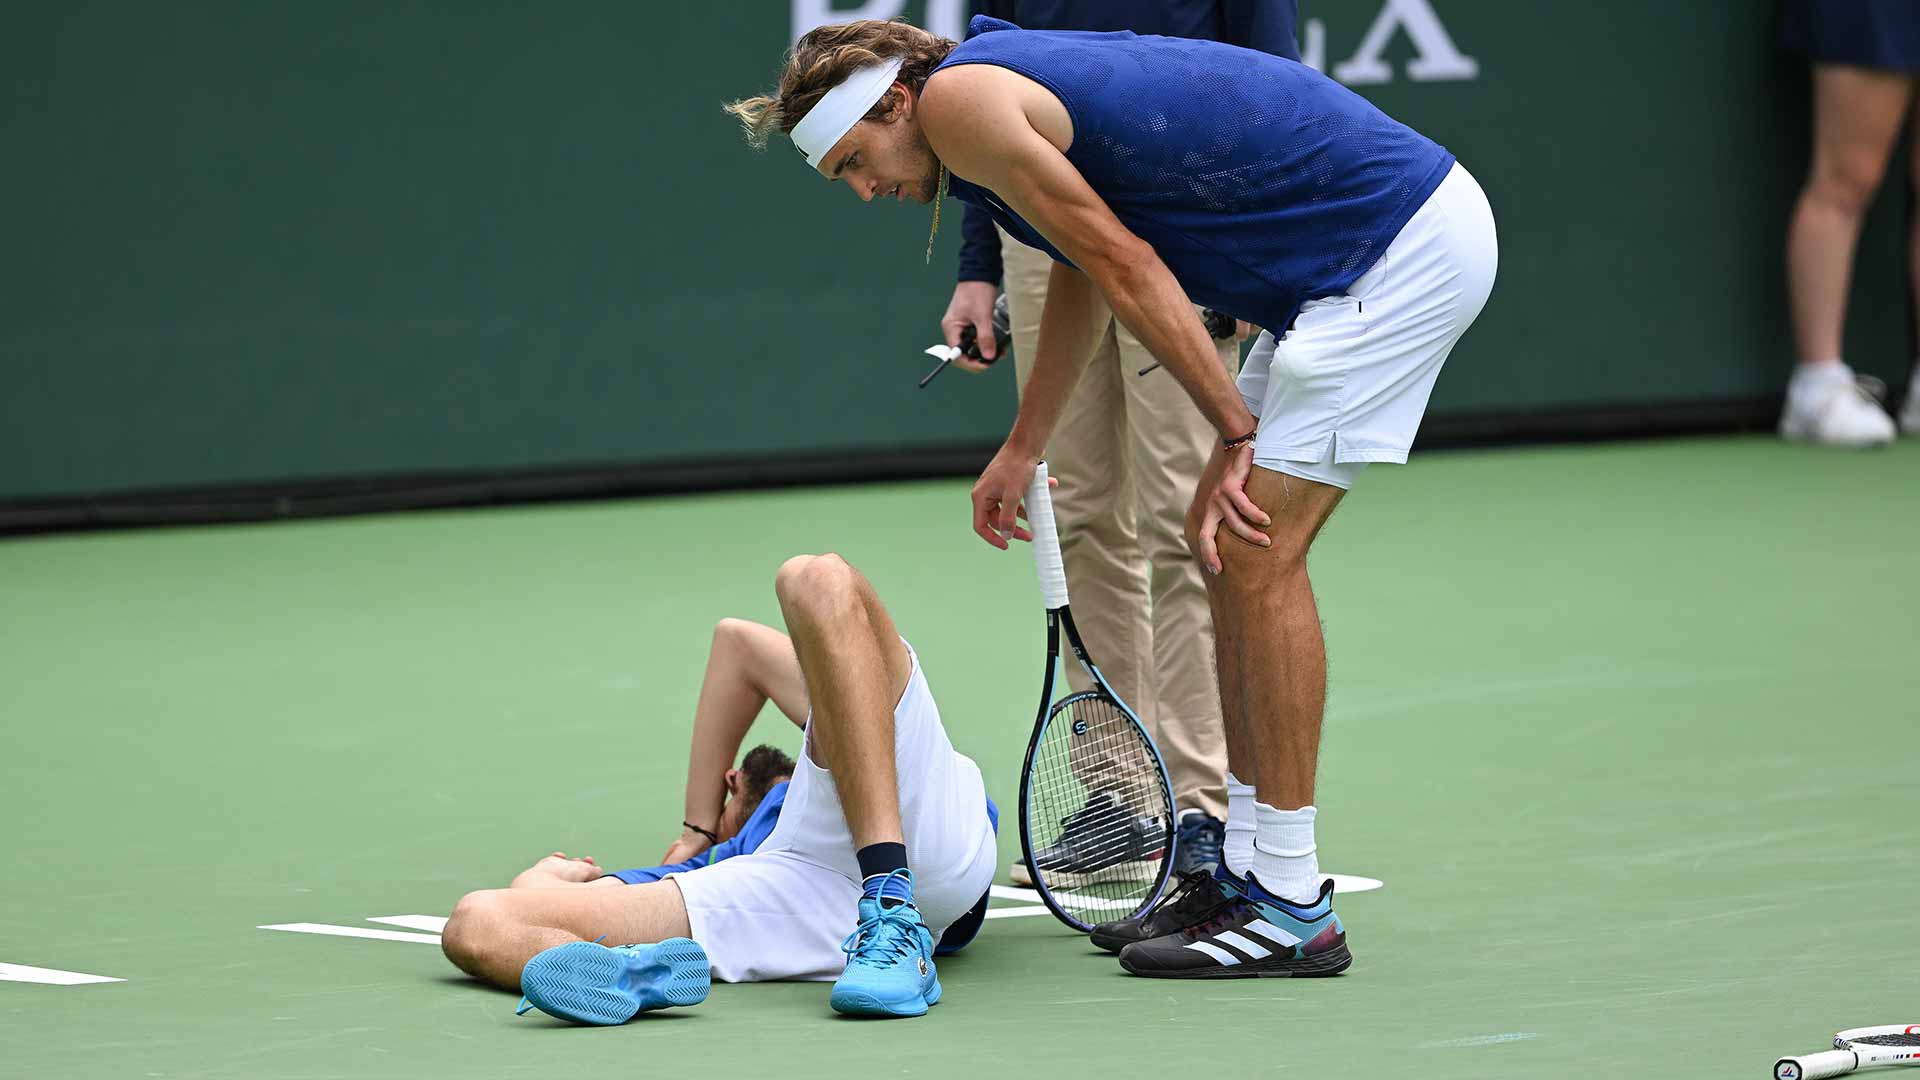 Daniil Medvedev takes time out after an ankle injury as Alexander Zverev looks on.